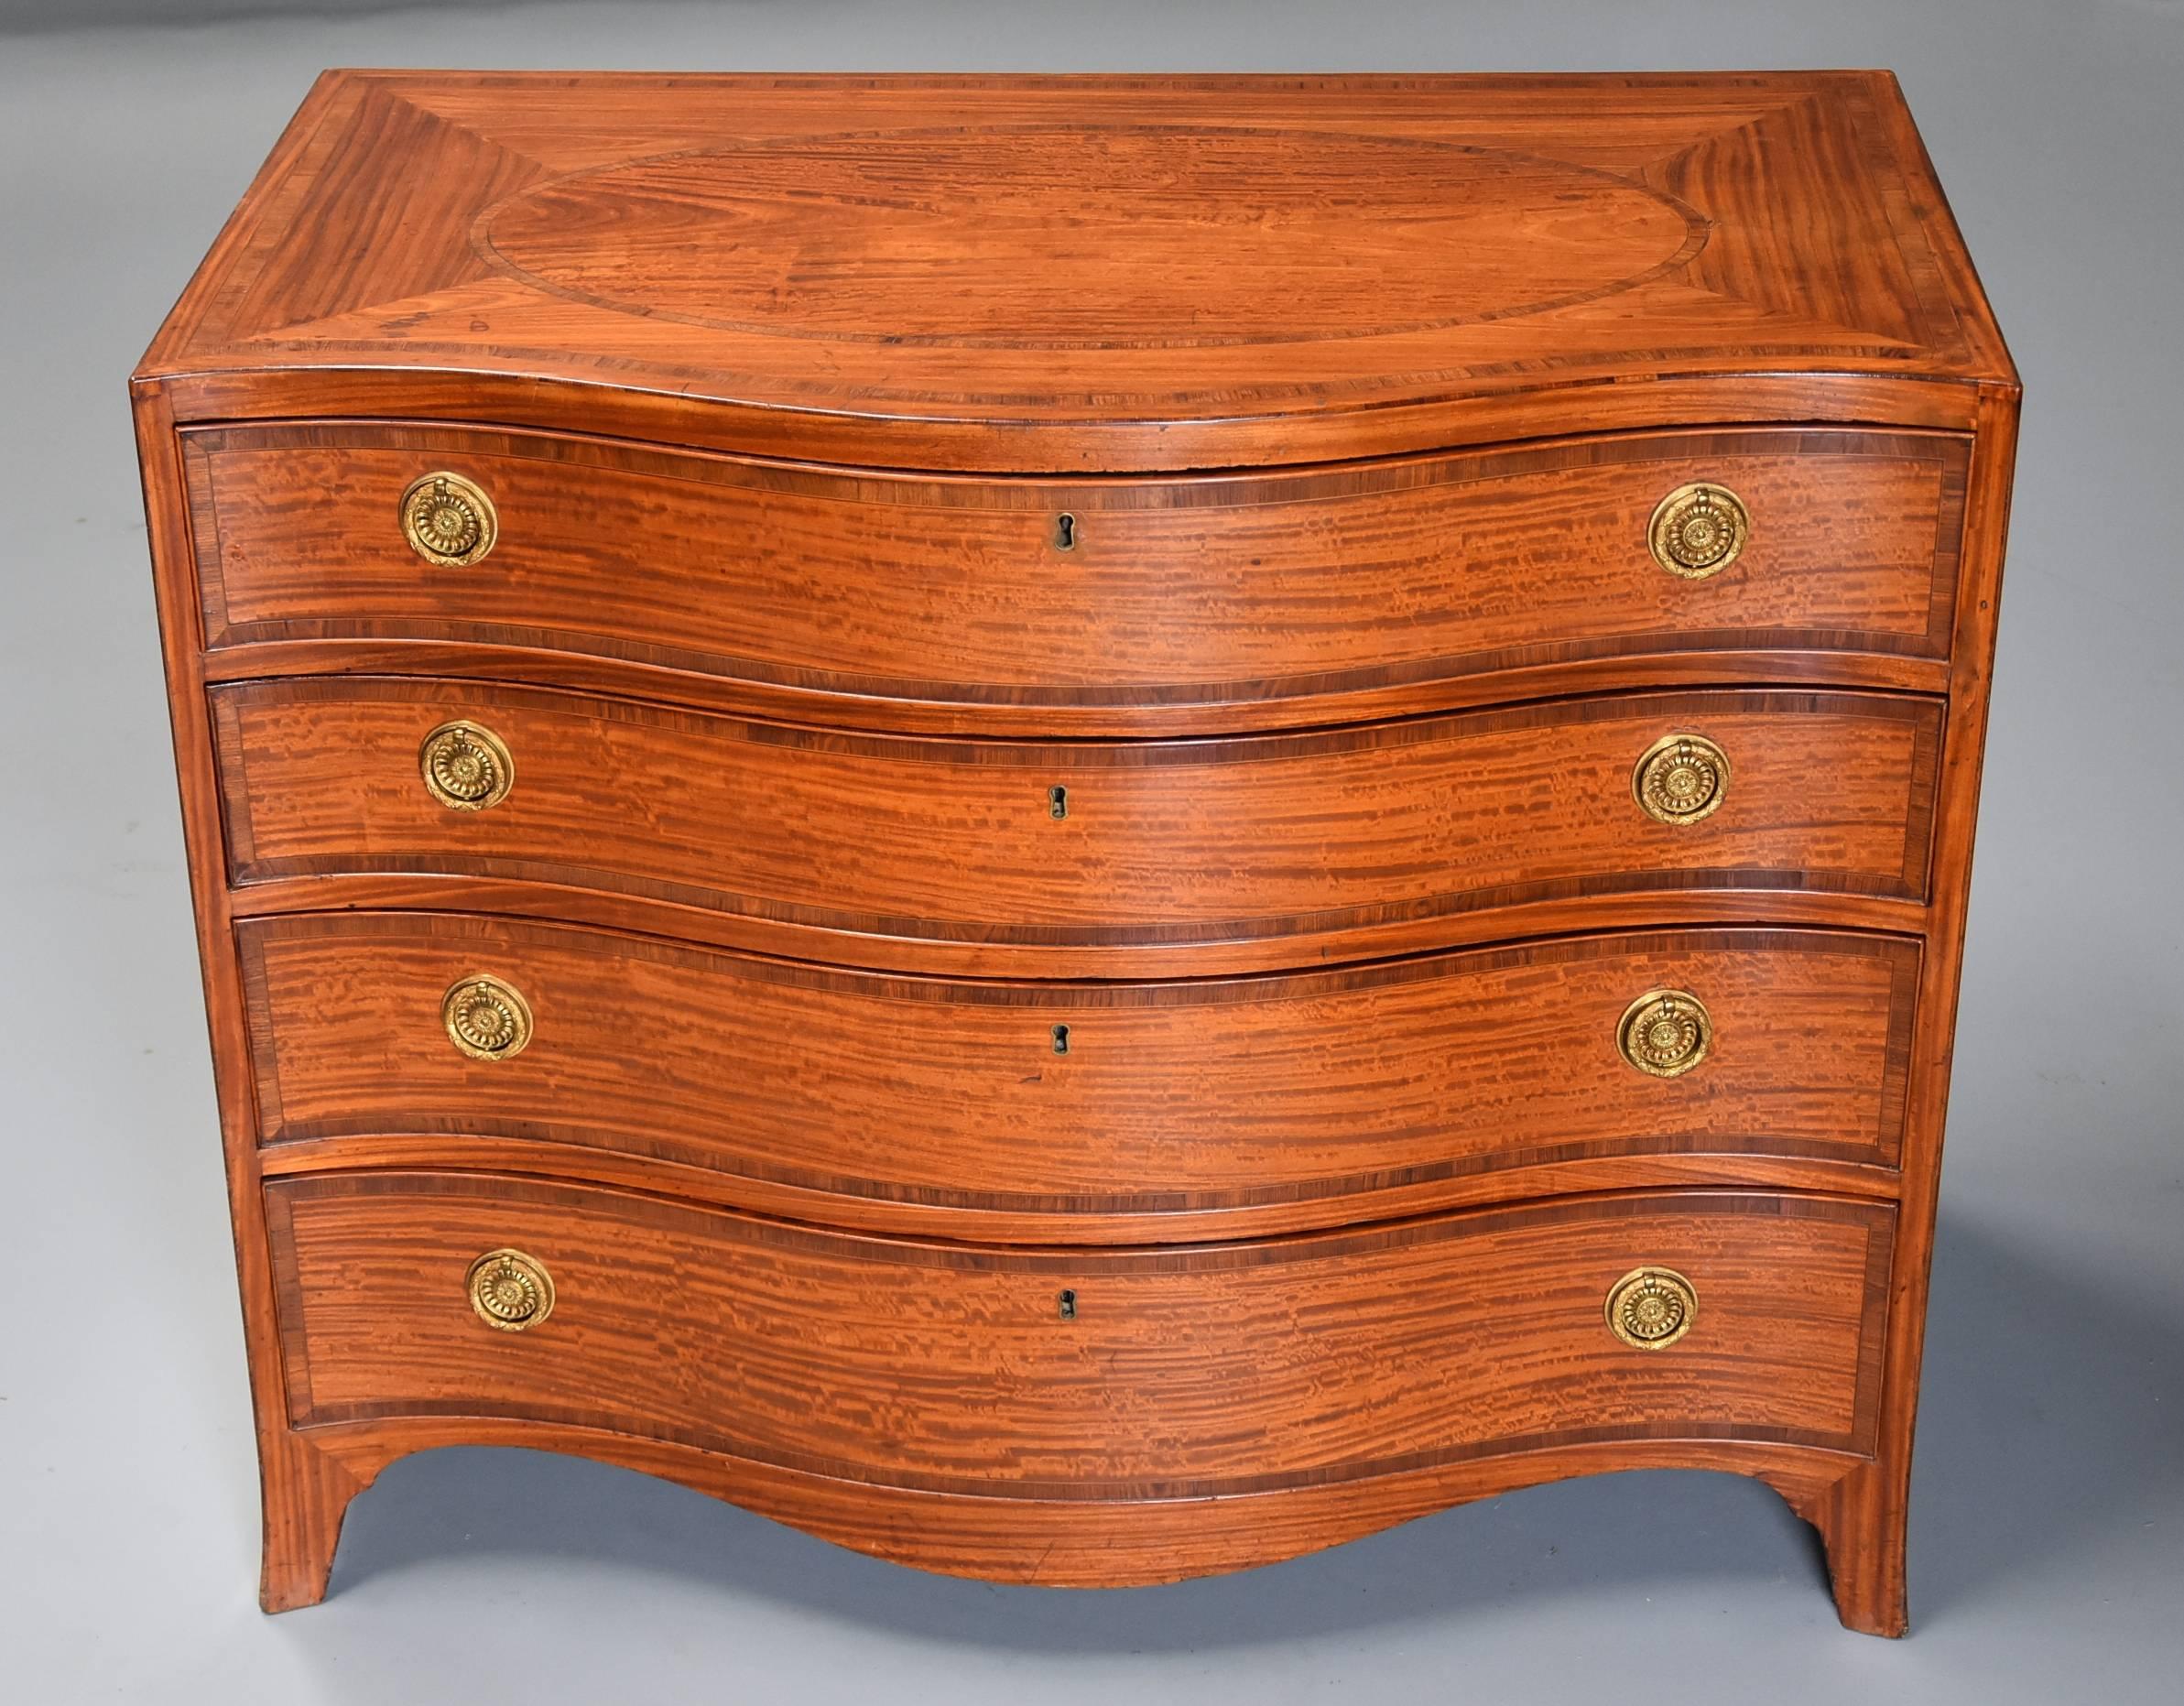 Superb Quality Serpentine Shaped Satinwood Gentleman's Dressing Chest In Good Condition For Sale In Suffolk, GB